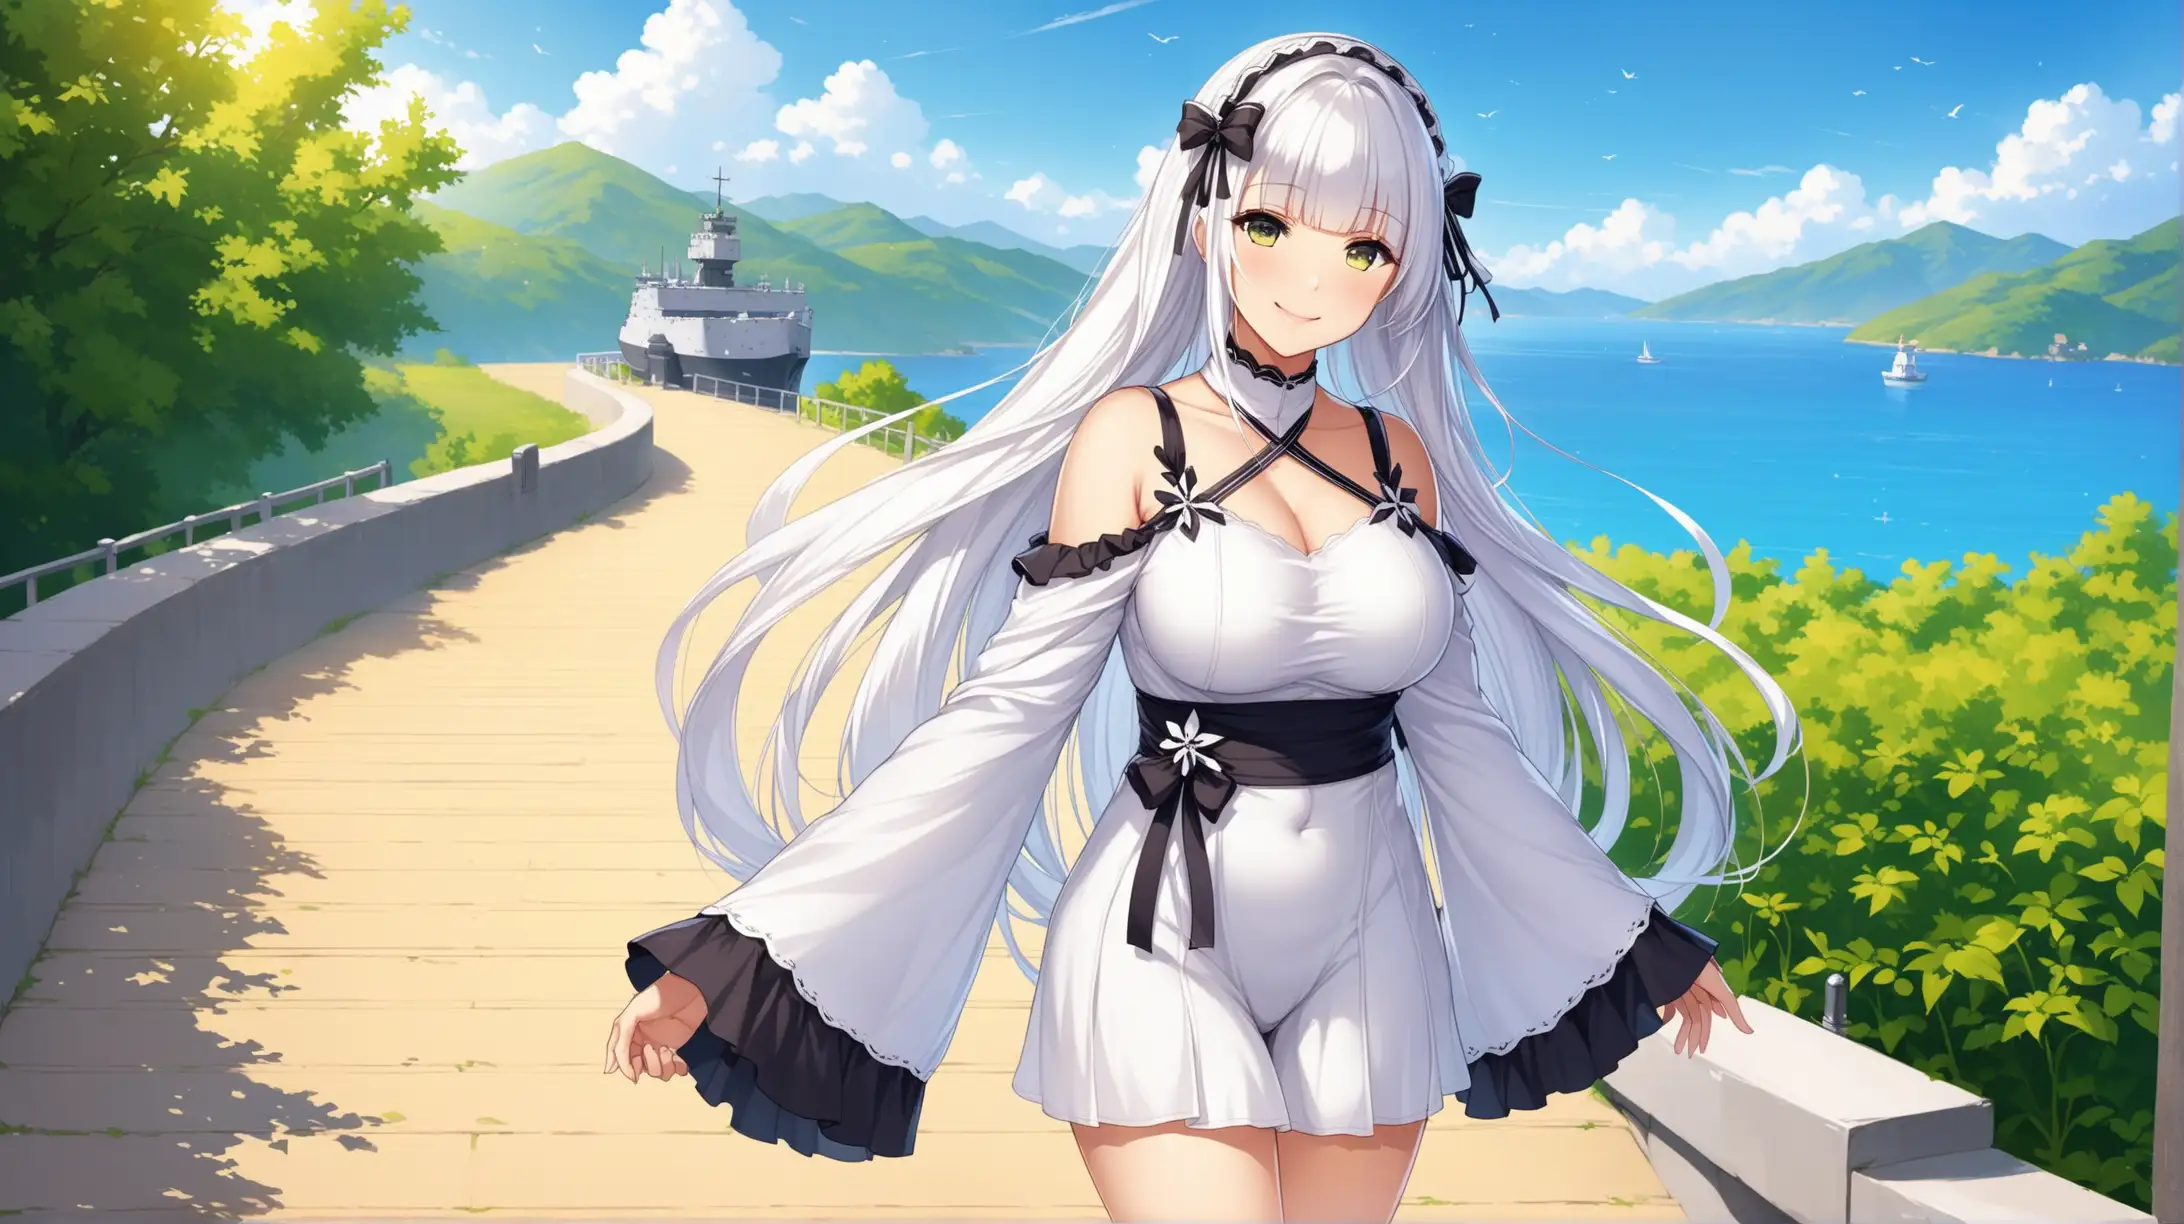 Illustrious from Azur Lane Smiling Outdoors in Casual Attire